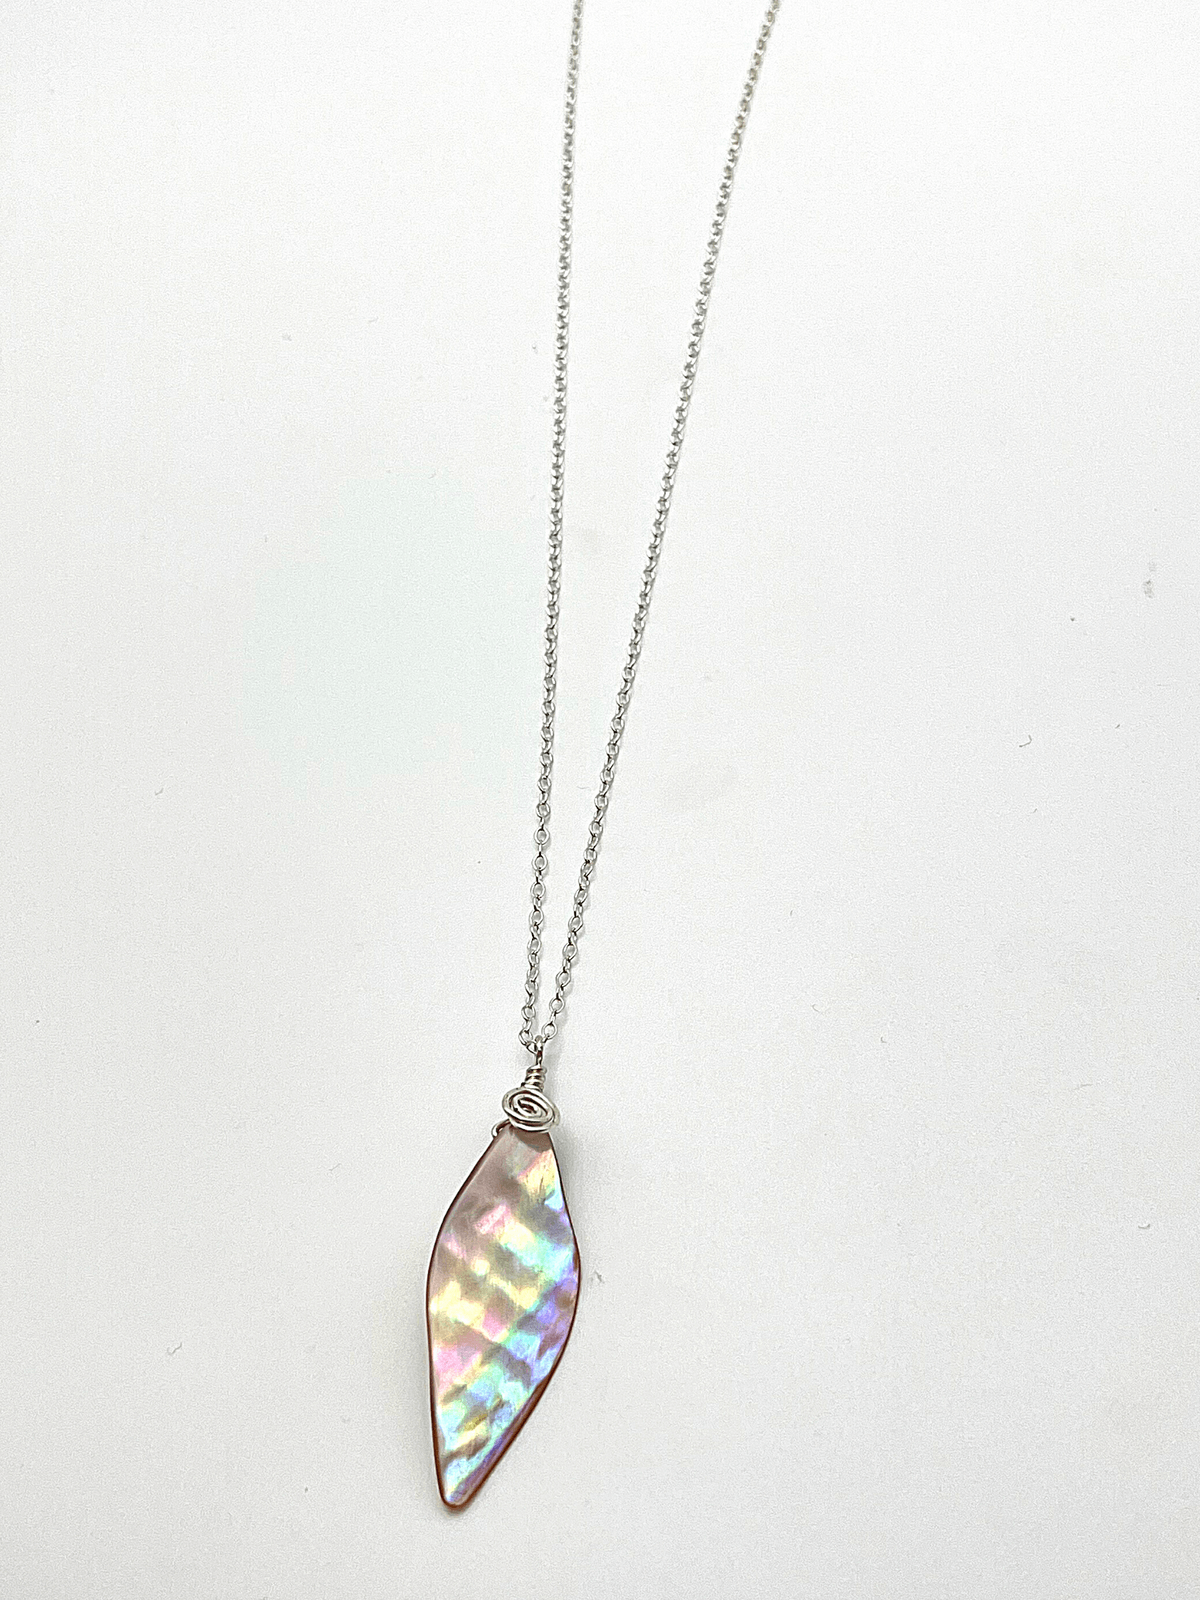 Northern Lights necklace